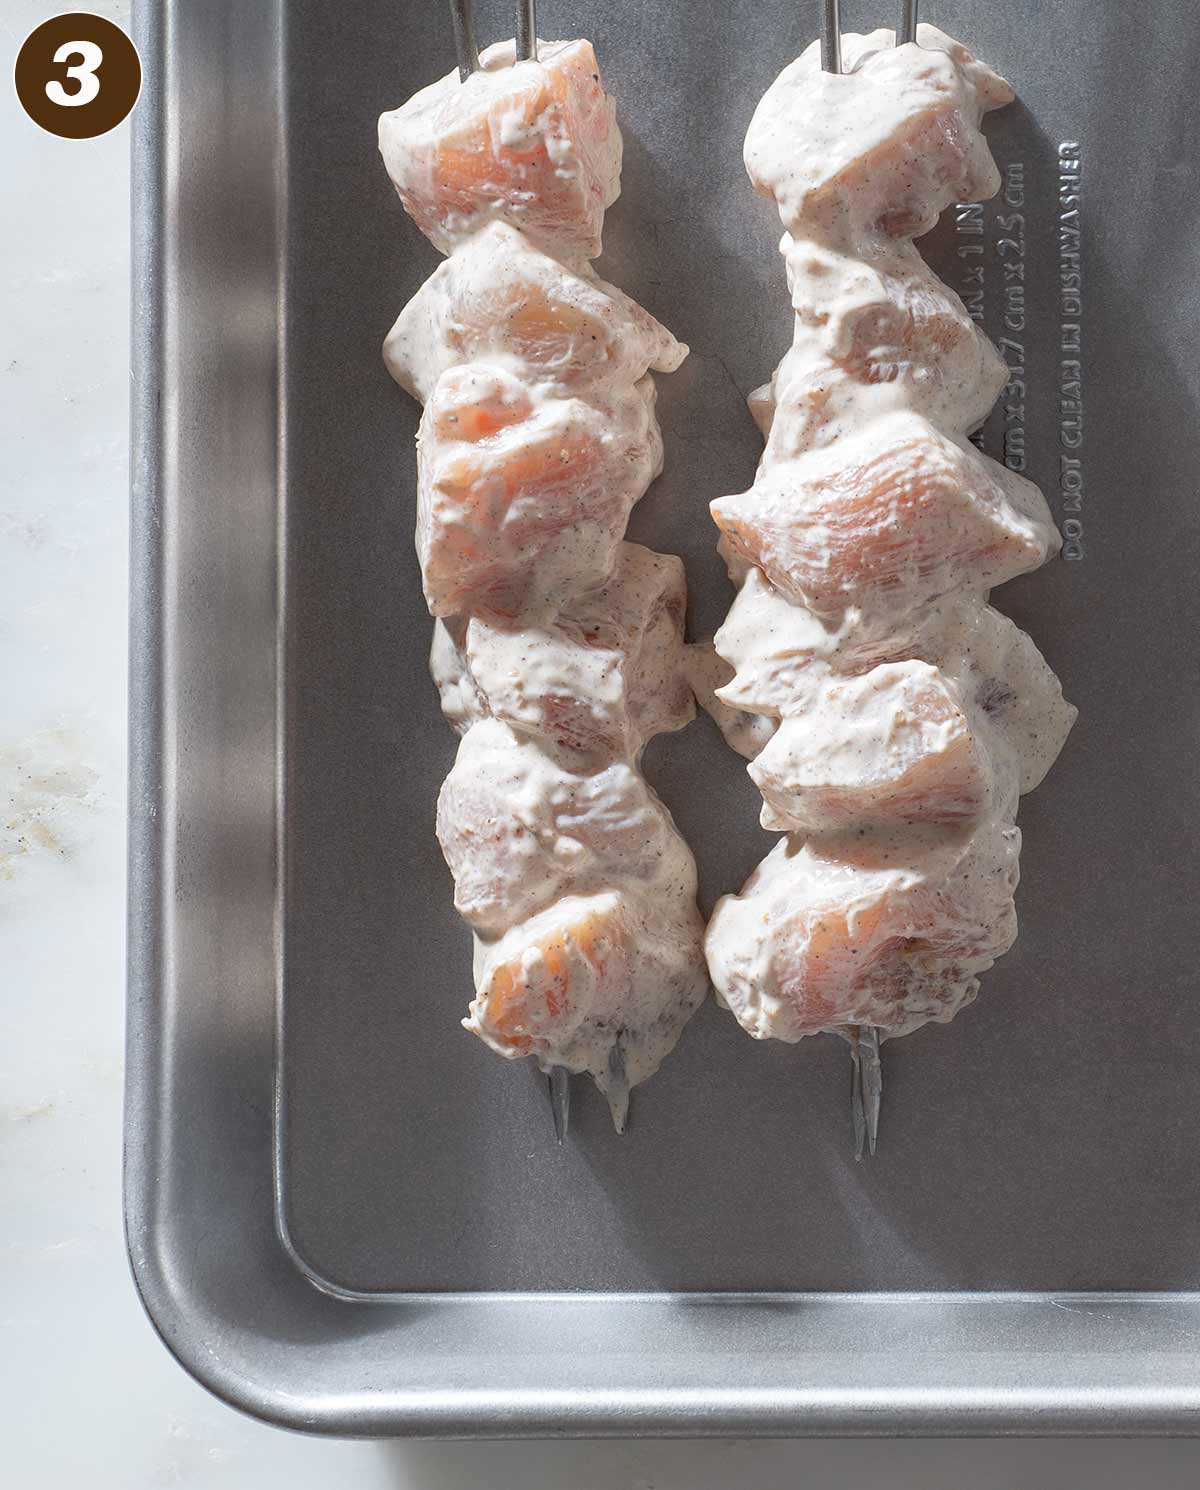 Marinated raw chicken on skewers on a baking sheet.